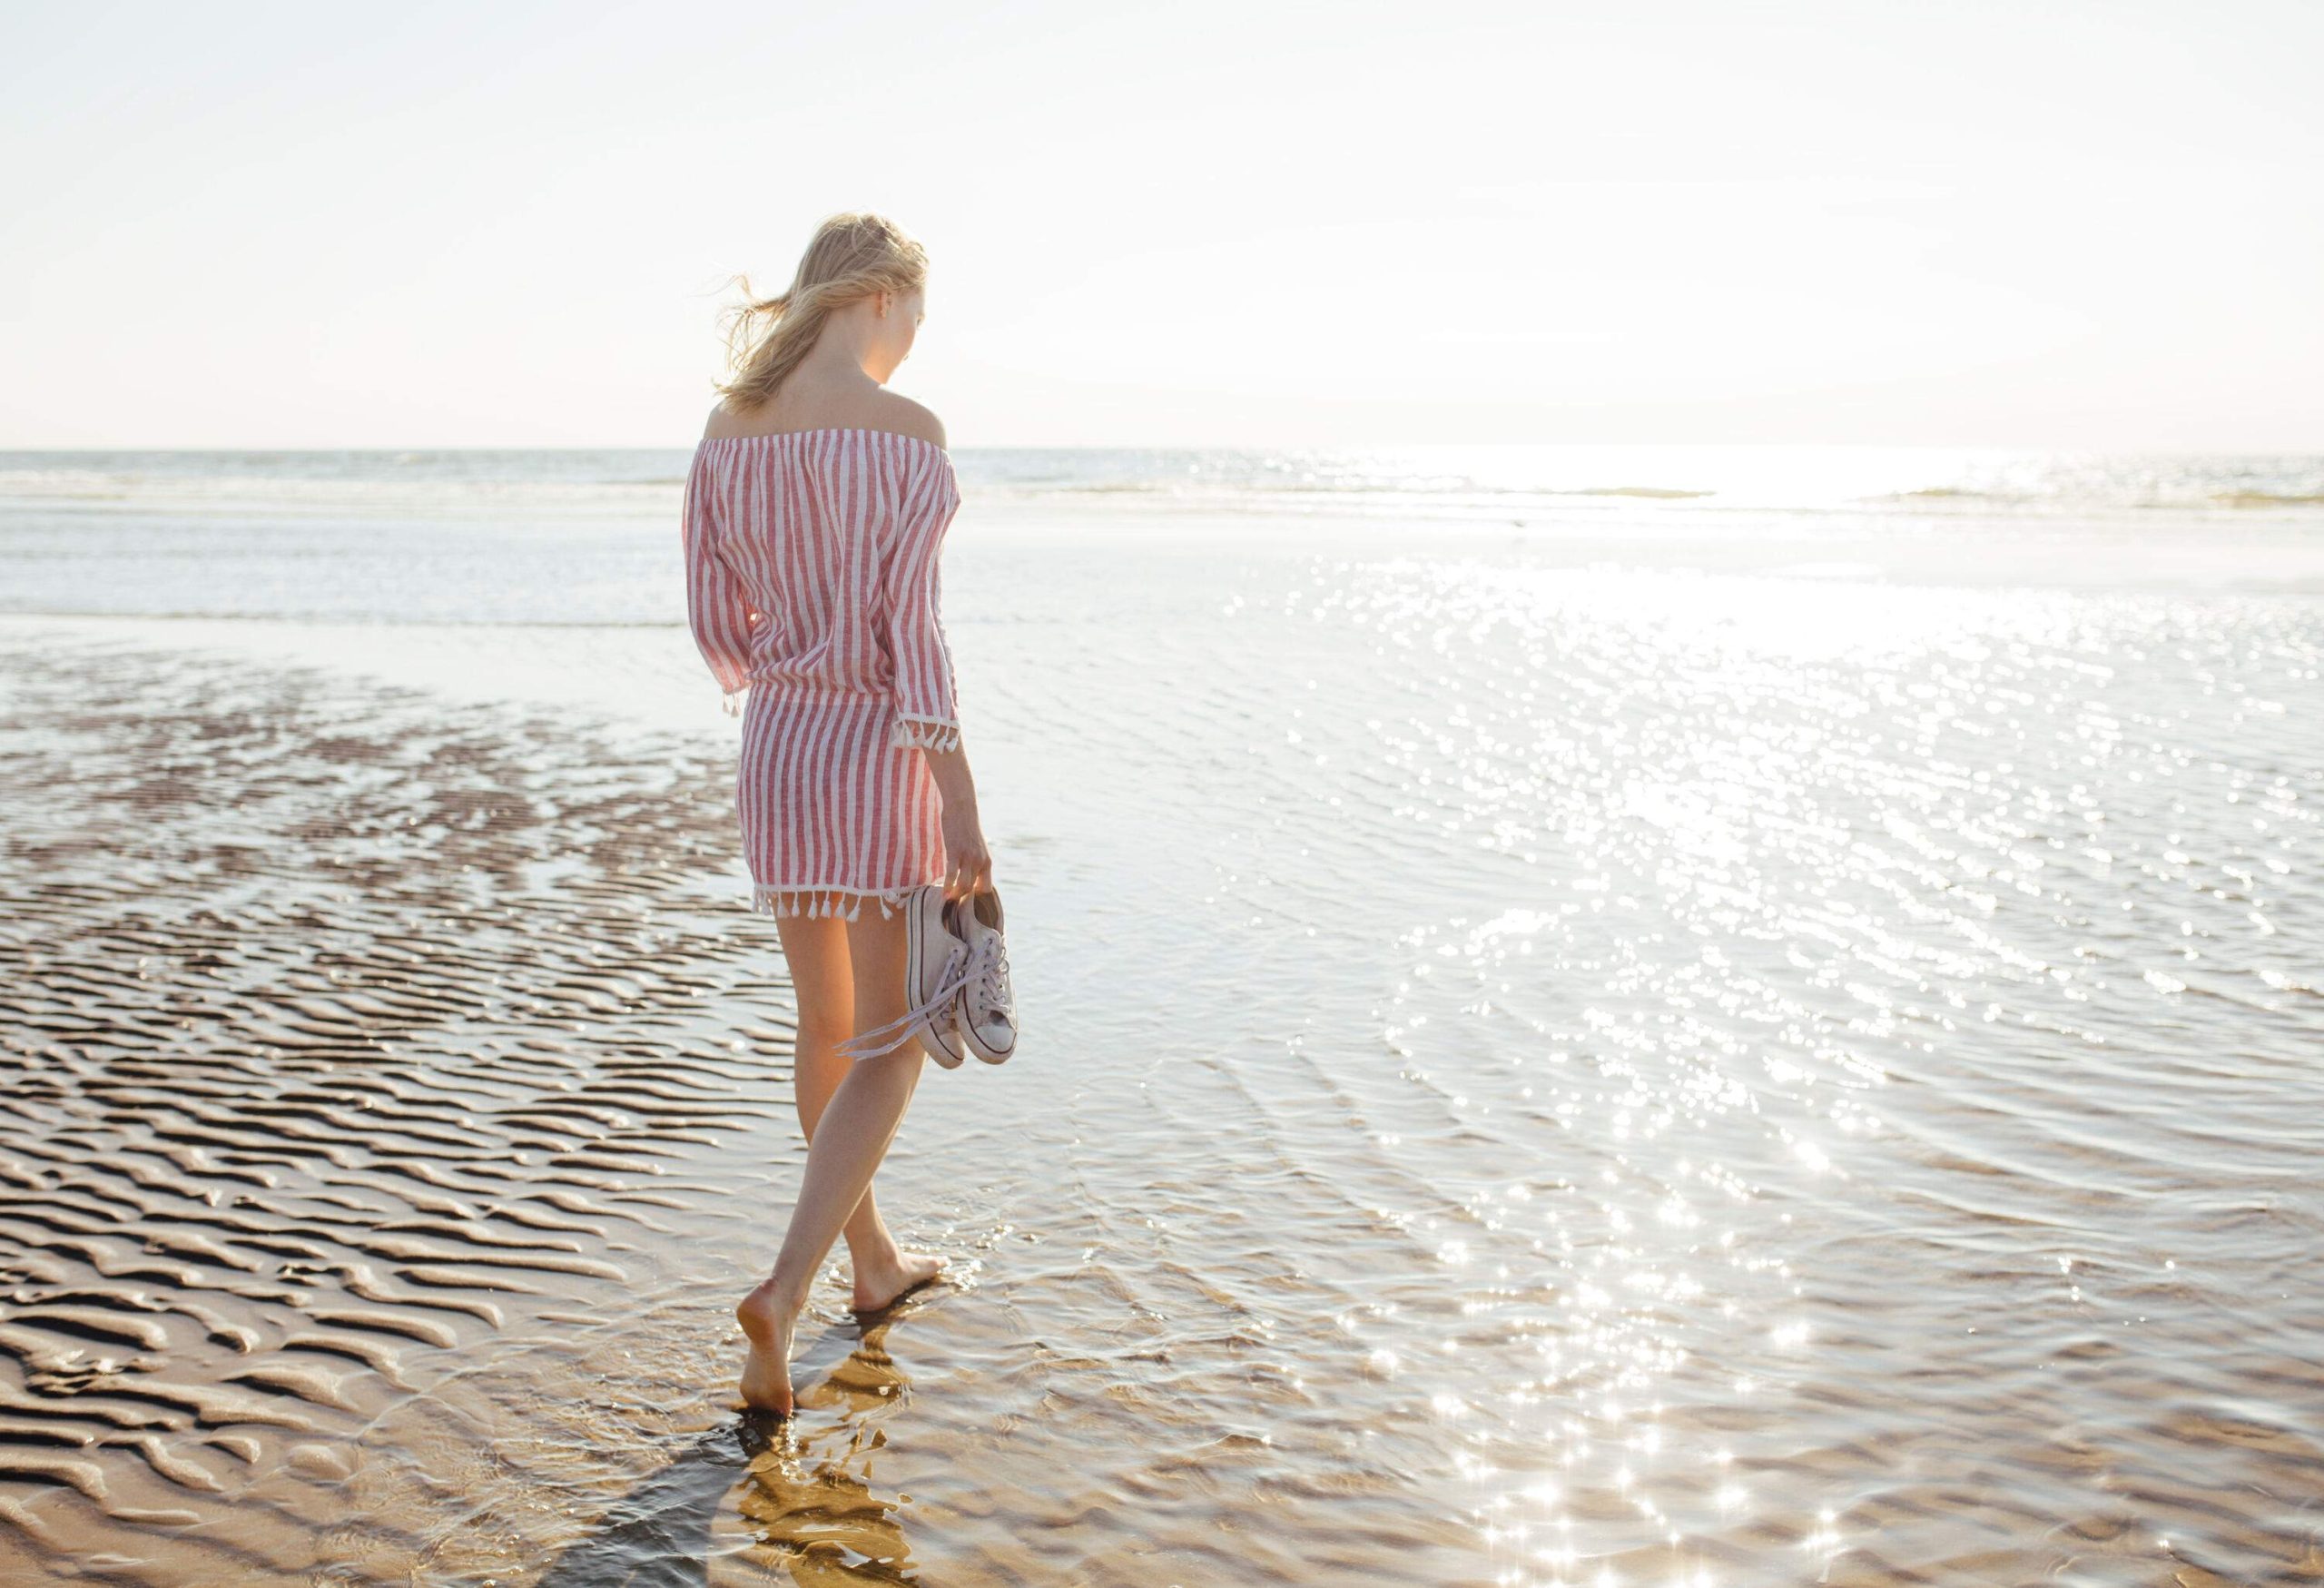 A woman walking on the beach with her sneakers in hand as the sea shimmers in the sunlight.